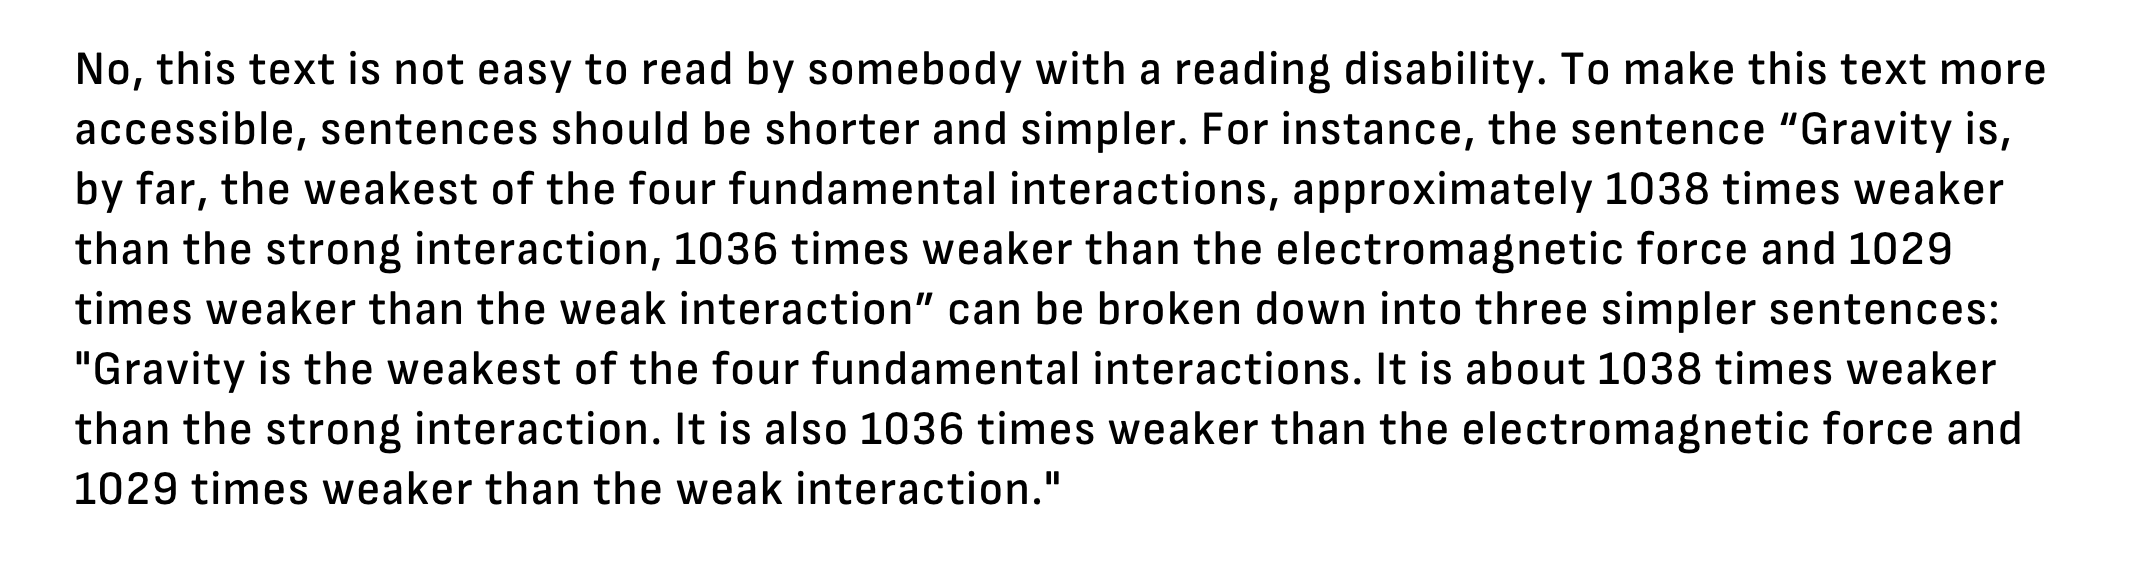 No, this text is not easy to read by somebody with a reading disability. To make this text more accessible, sentences should be shorter and simpler. For instance, the sentence “Gravity is, by far, the weakest of the four fundamental interactions, approximately 1038 times weaker than the strong interaction, 1036 times weaker than the electromagnetic force and 1029 times weaker than the weak interaction” can be broken down into three simpler sentences: "Gravity is the weakest of the four fundamental interactions. It is about 1038 times weaker than the strong interaction. It is also 1036 times weaker than the electromagnetic force and 1029 times weaker than the weak interaction.